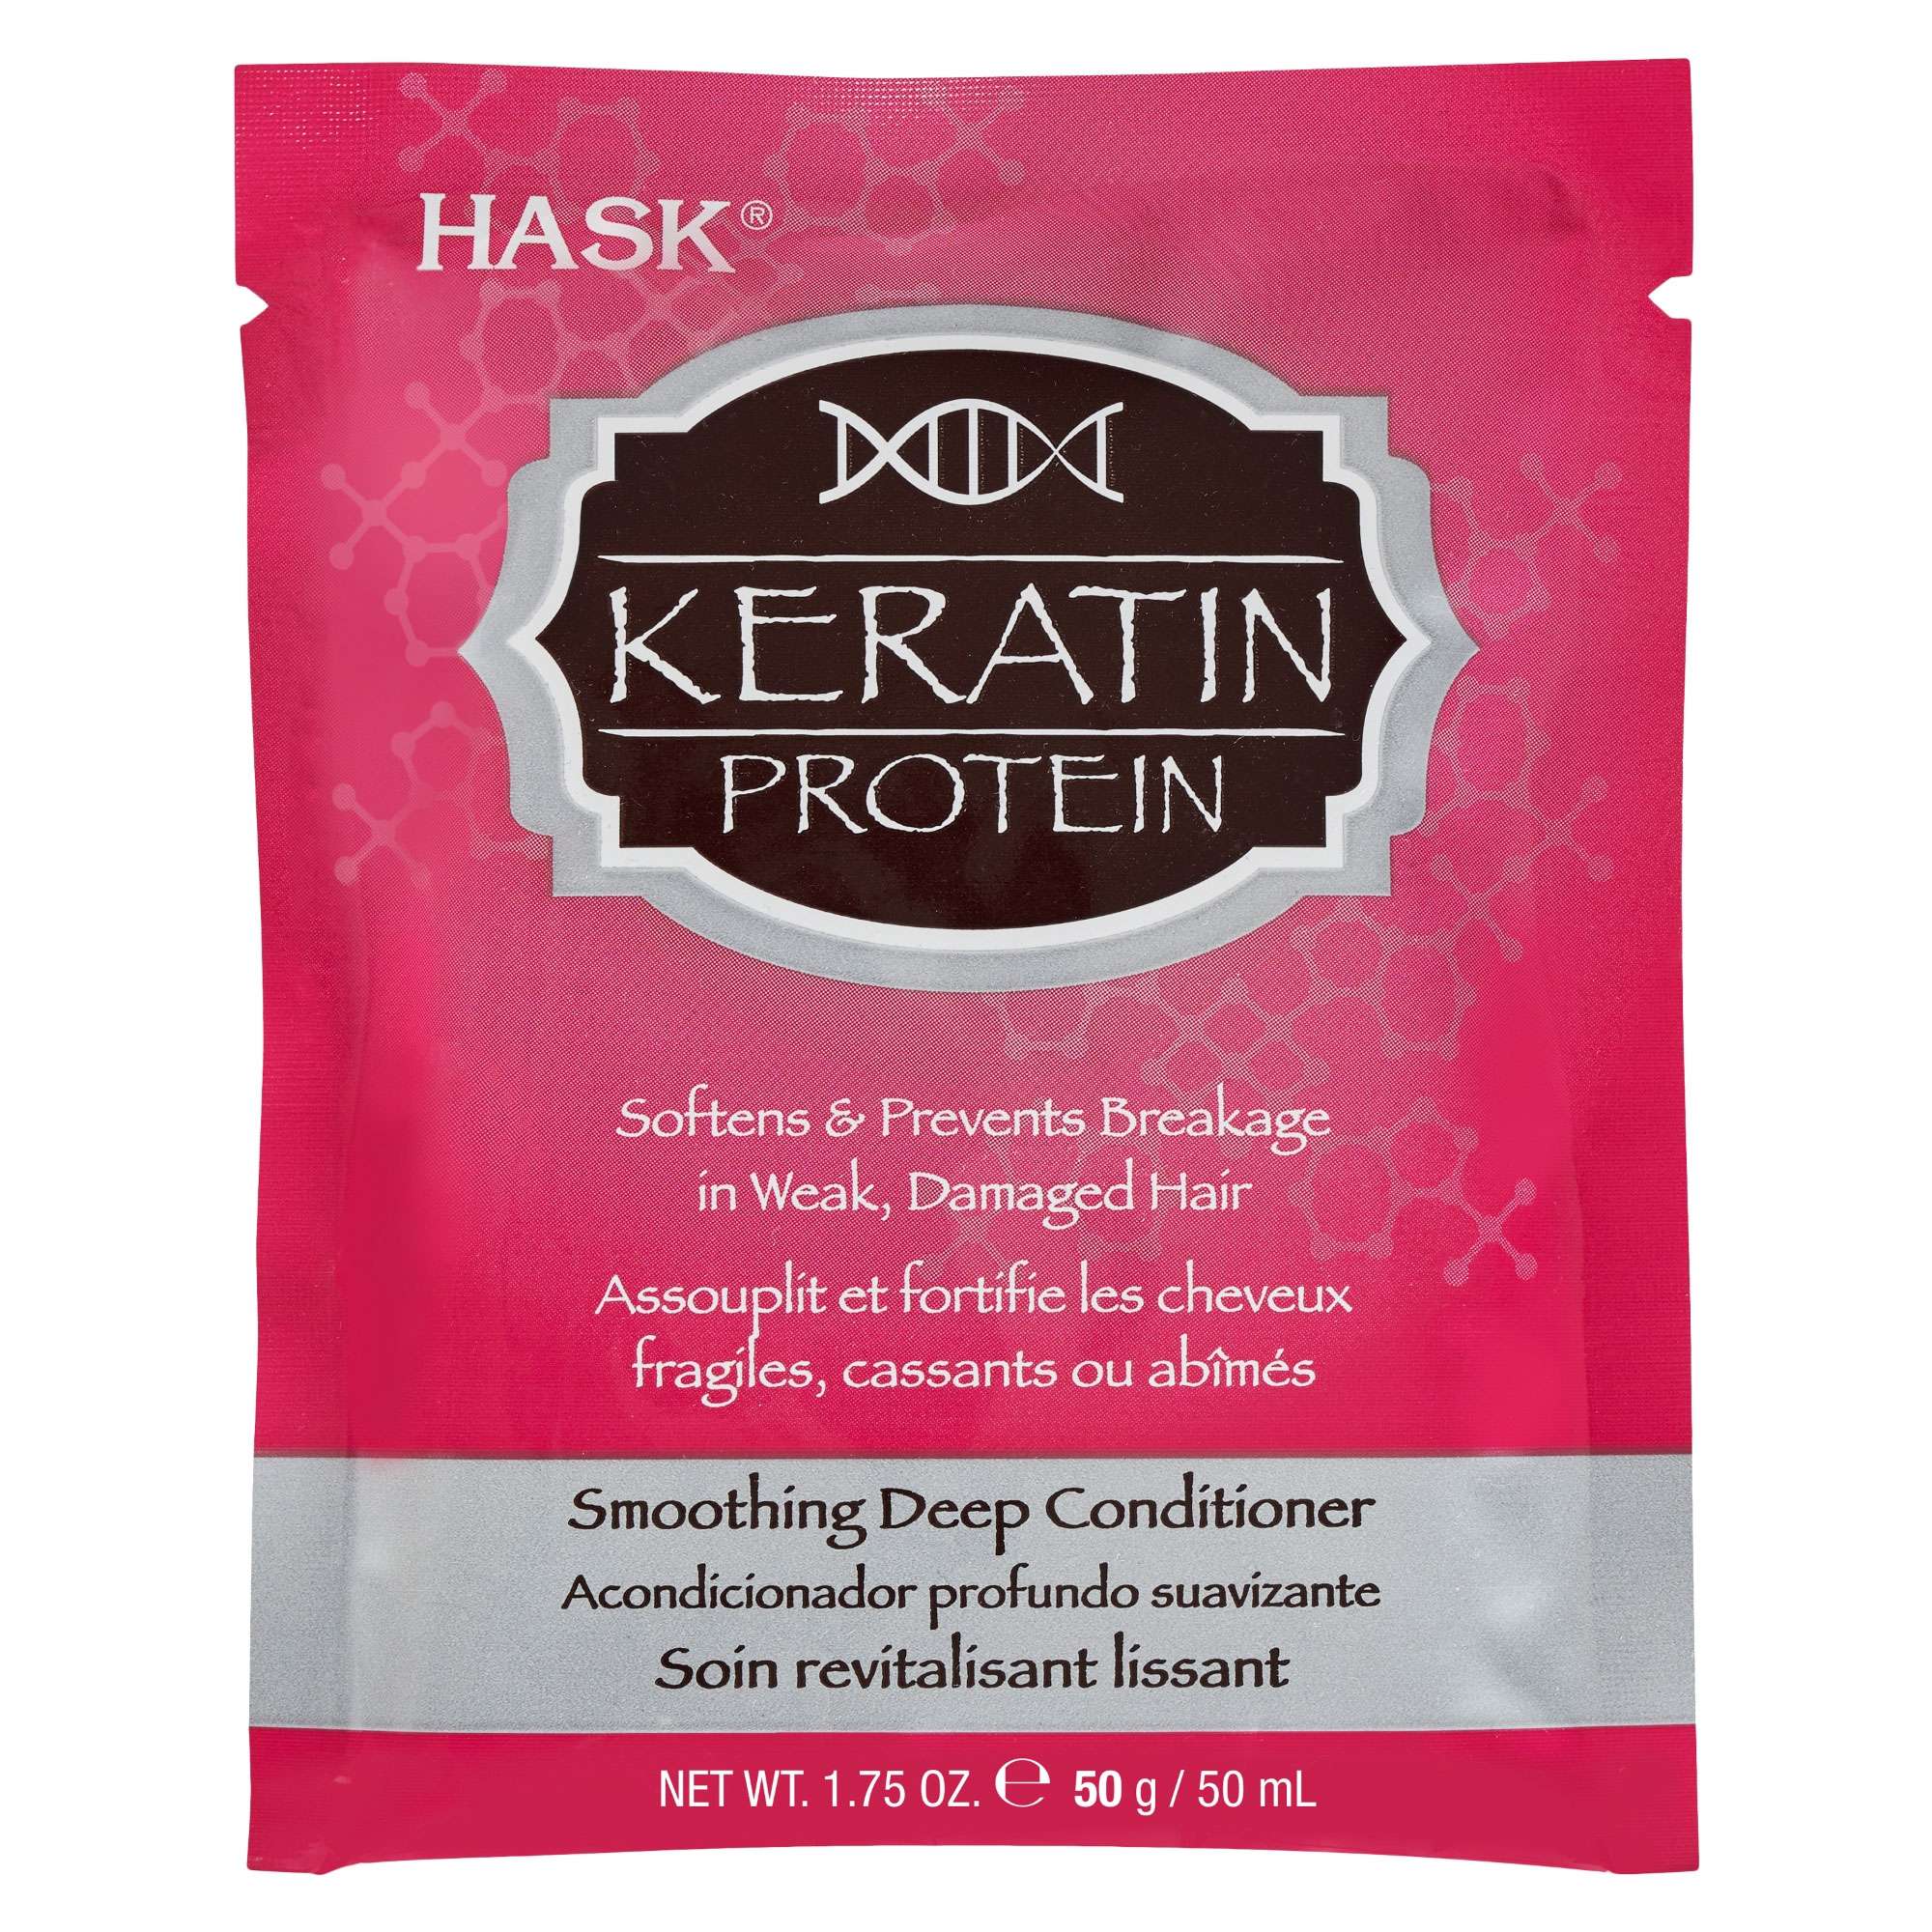 Hask Keratin Protein Smoothing Deep Conditioner, 1.75 Oz.,Pack of 2 ...